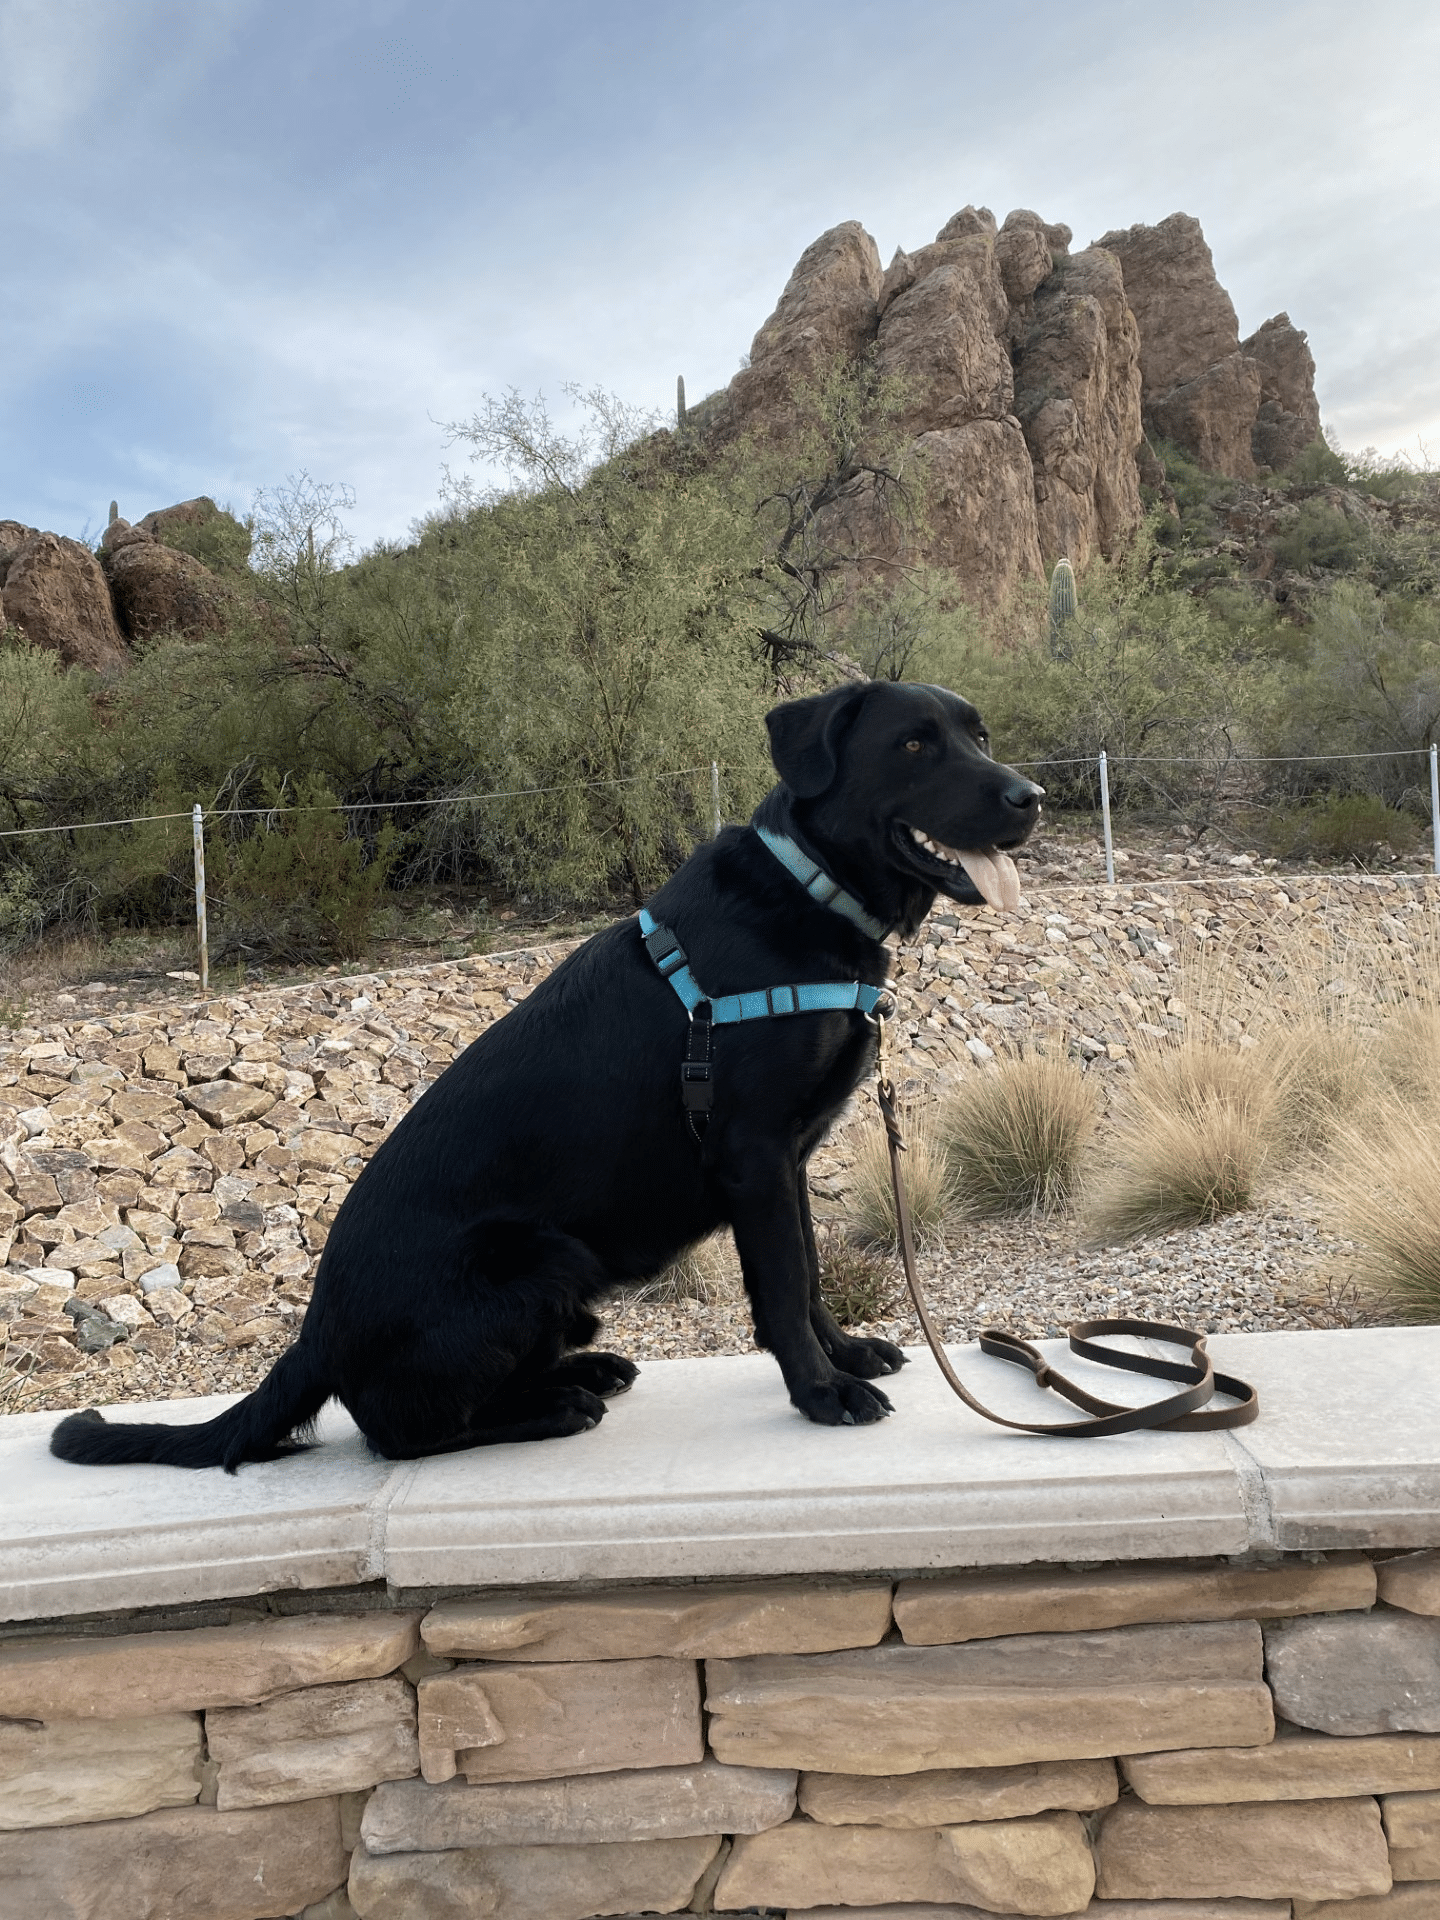 A leashed and harnessed black Labrador Retriever sits patiently on a wall in front of a desert landscape in Arizona.